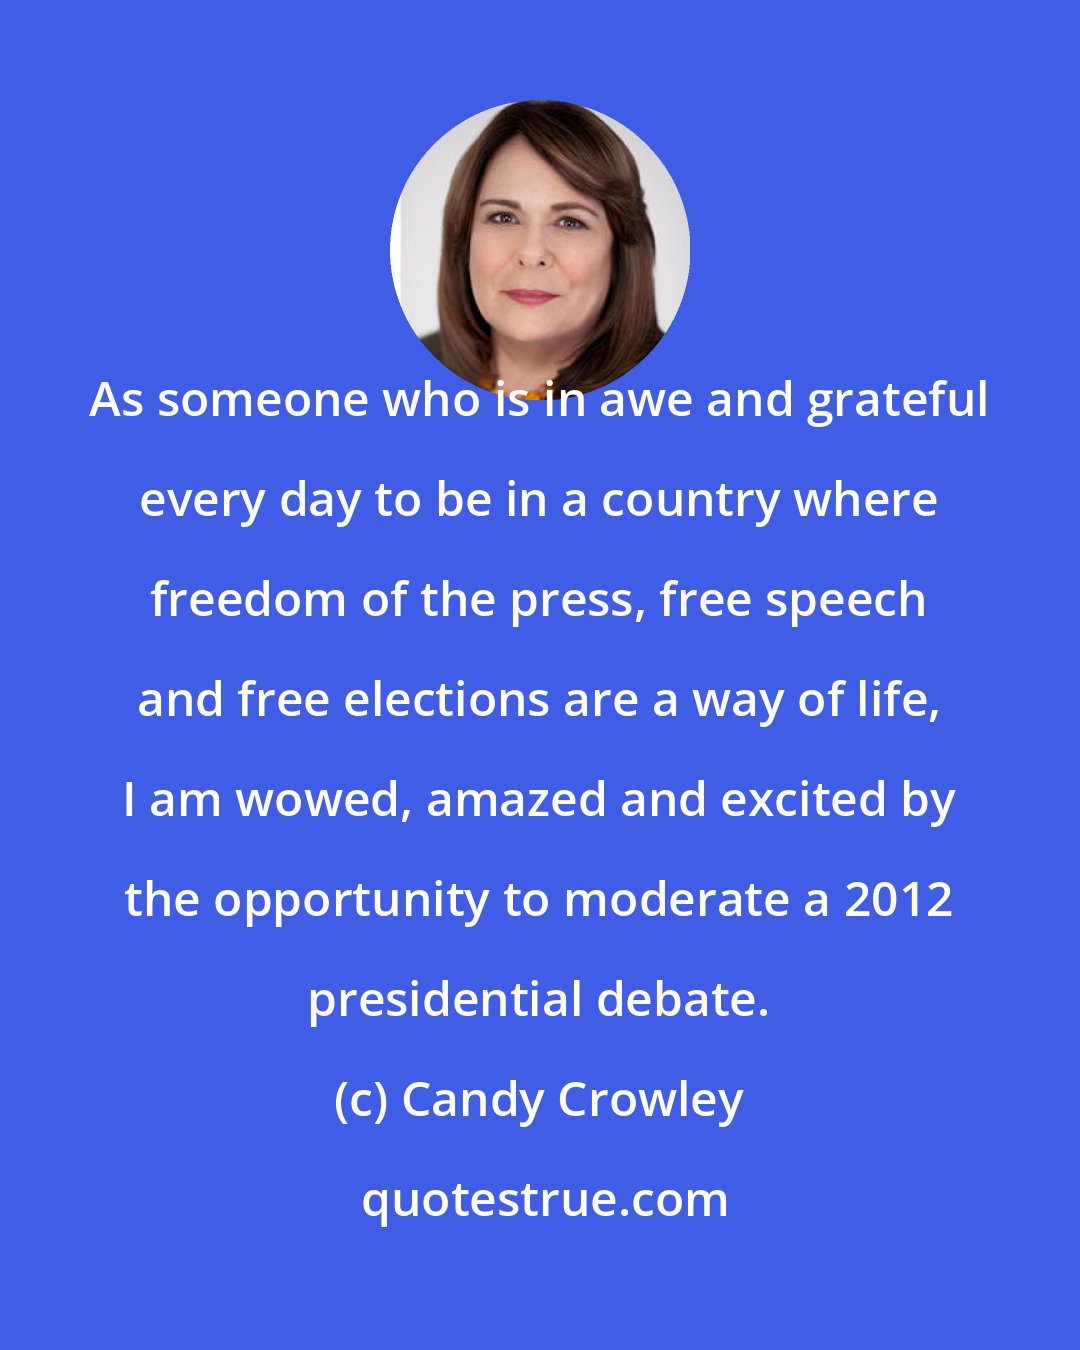 Candy Crowley: As someone who is in awe and grateful every day to be in a country where freedom of the press, free speech and free elections are a way of life, I am wowed, amazed and excited by the opportunity to moderate a 2012 presidential debate.